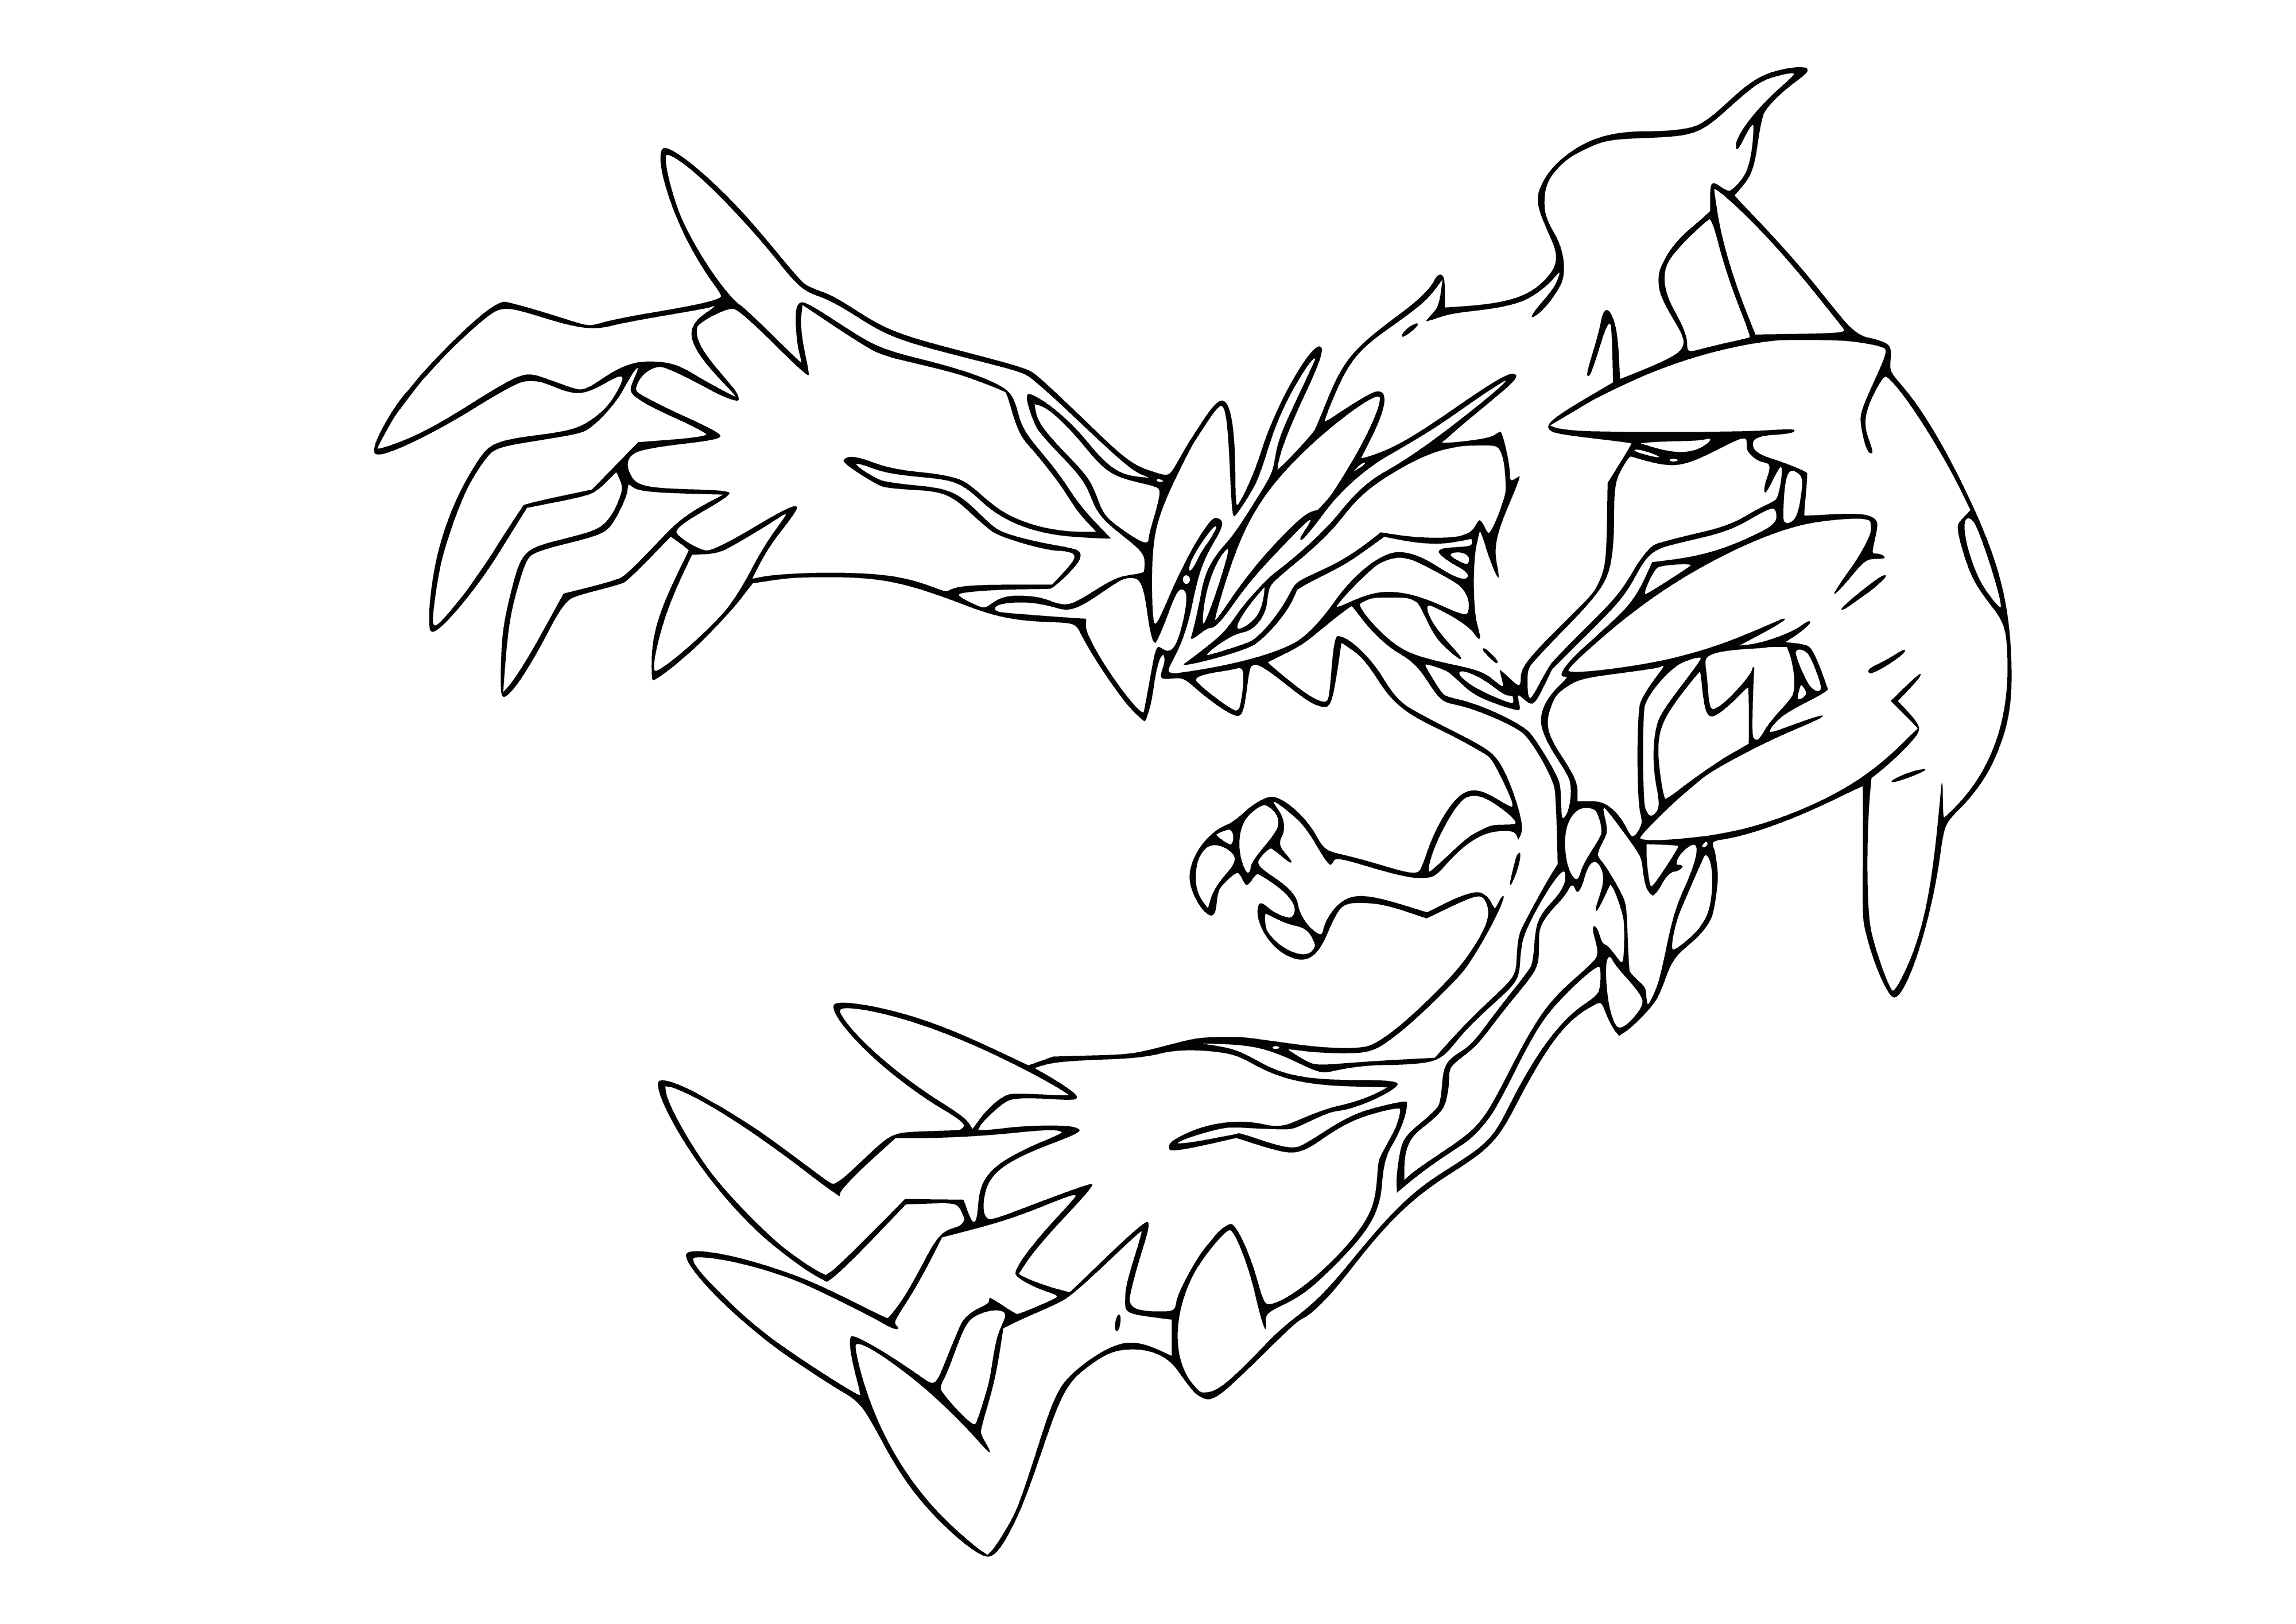 coloring page: A large, dark Pokémon with rounded wings, a long tail, red eyes, a beak-like mouth, and talons.